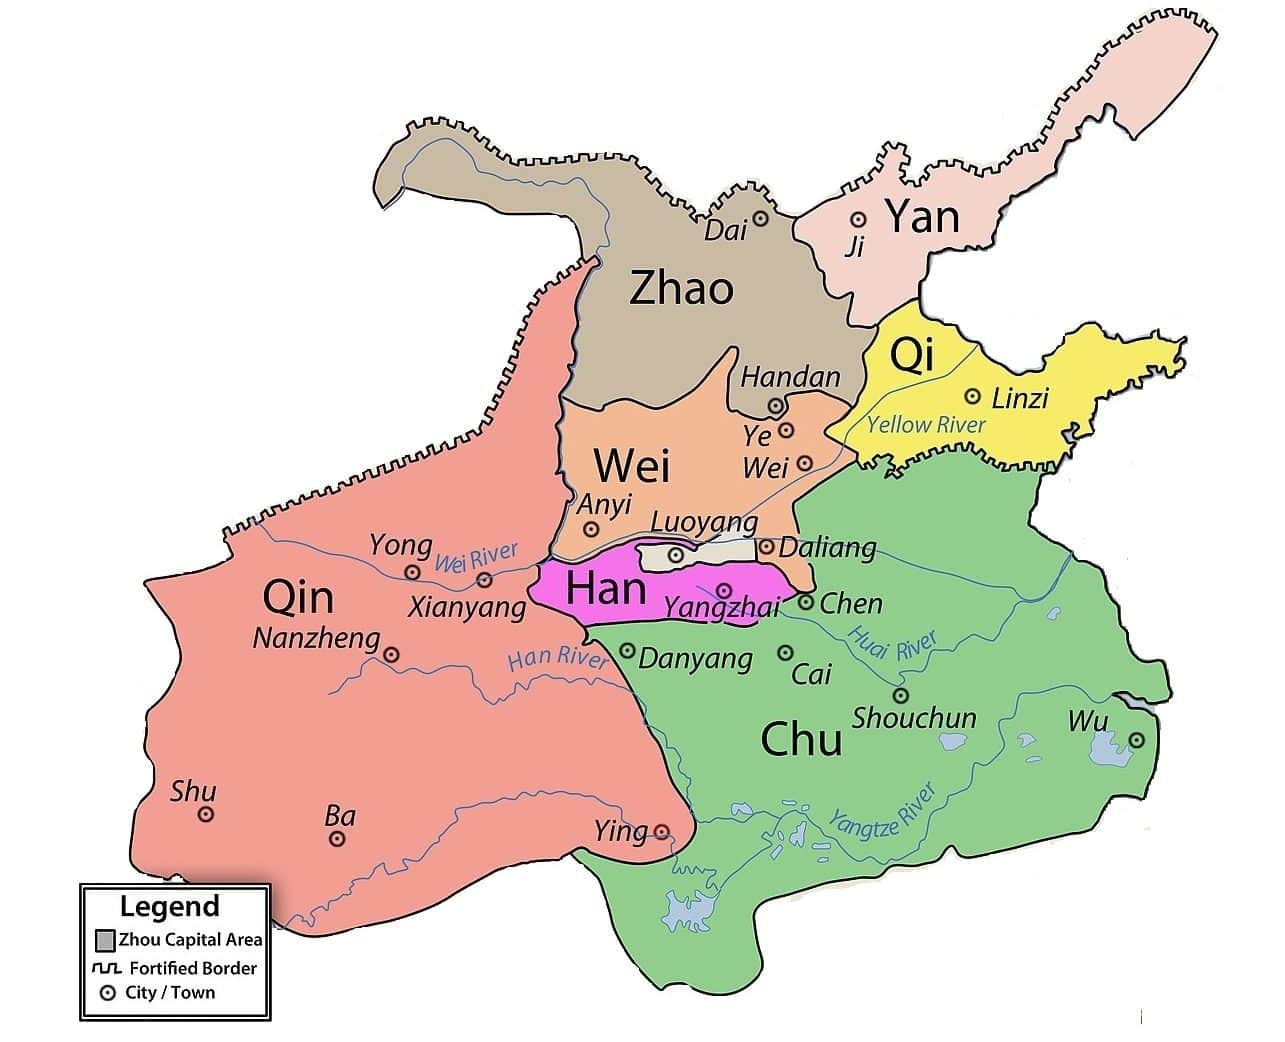 The seven wonders of the world - Map of China during Warring States Period